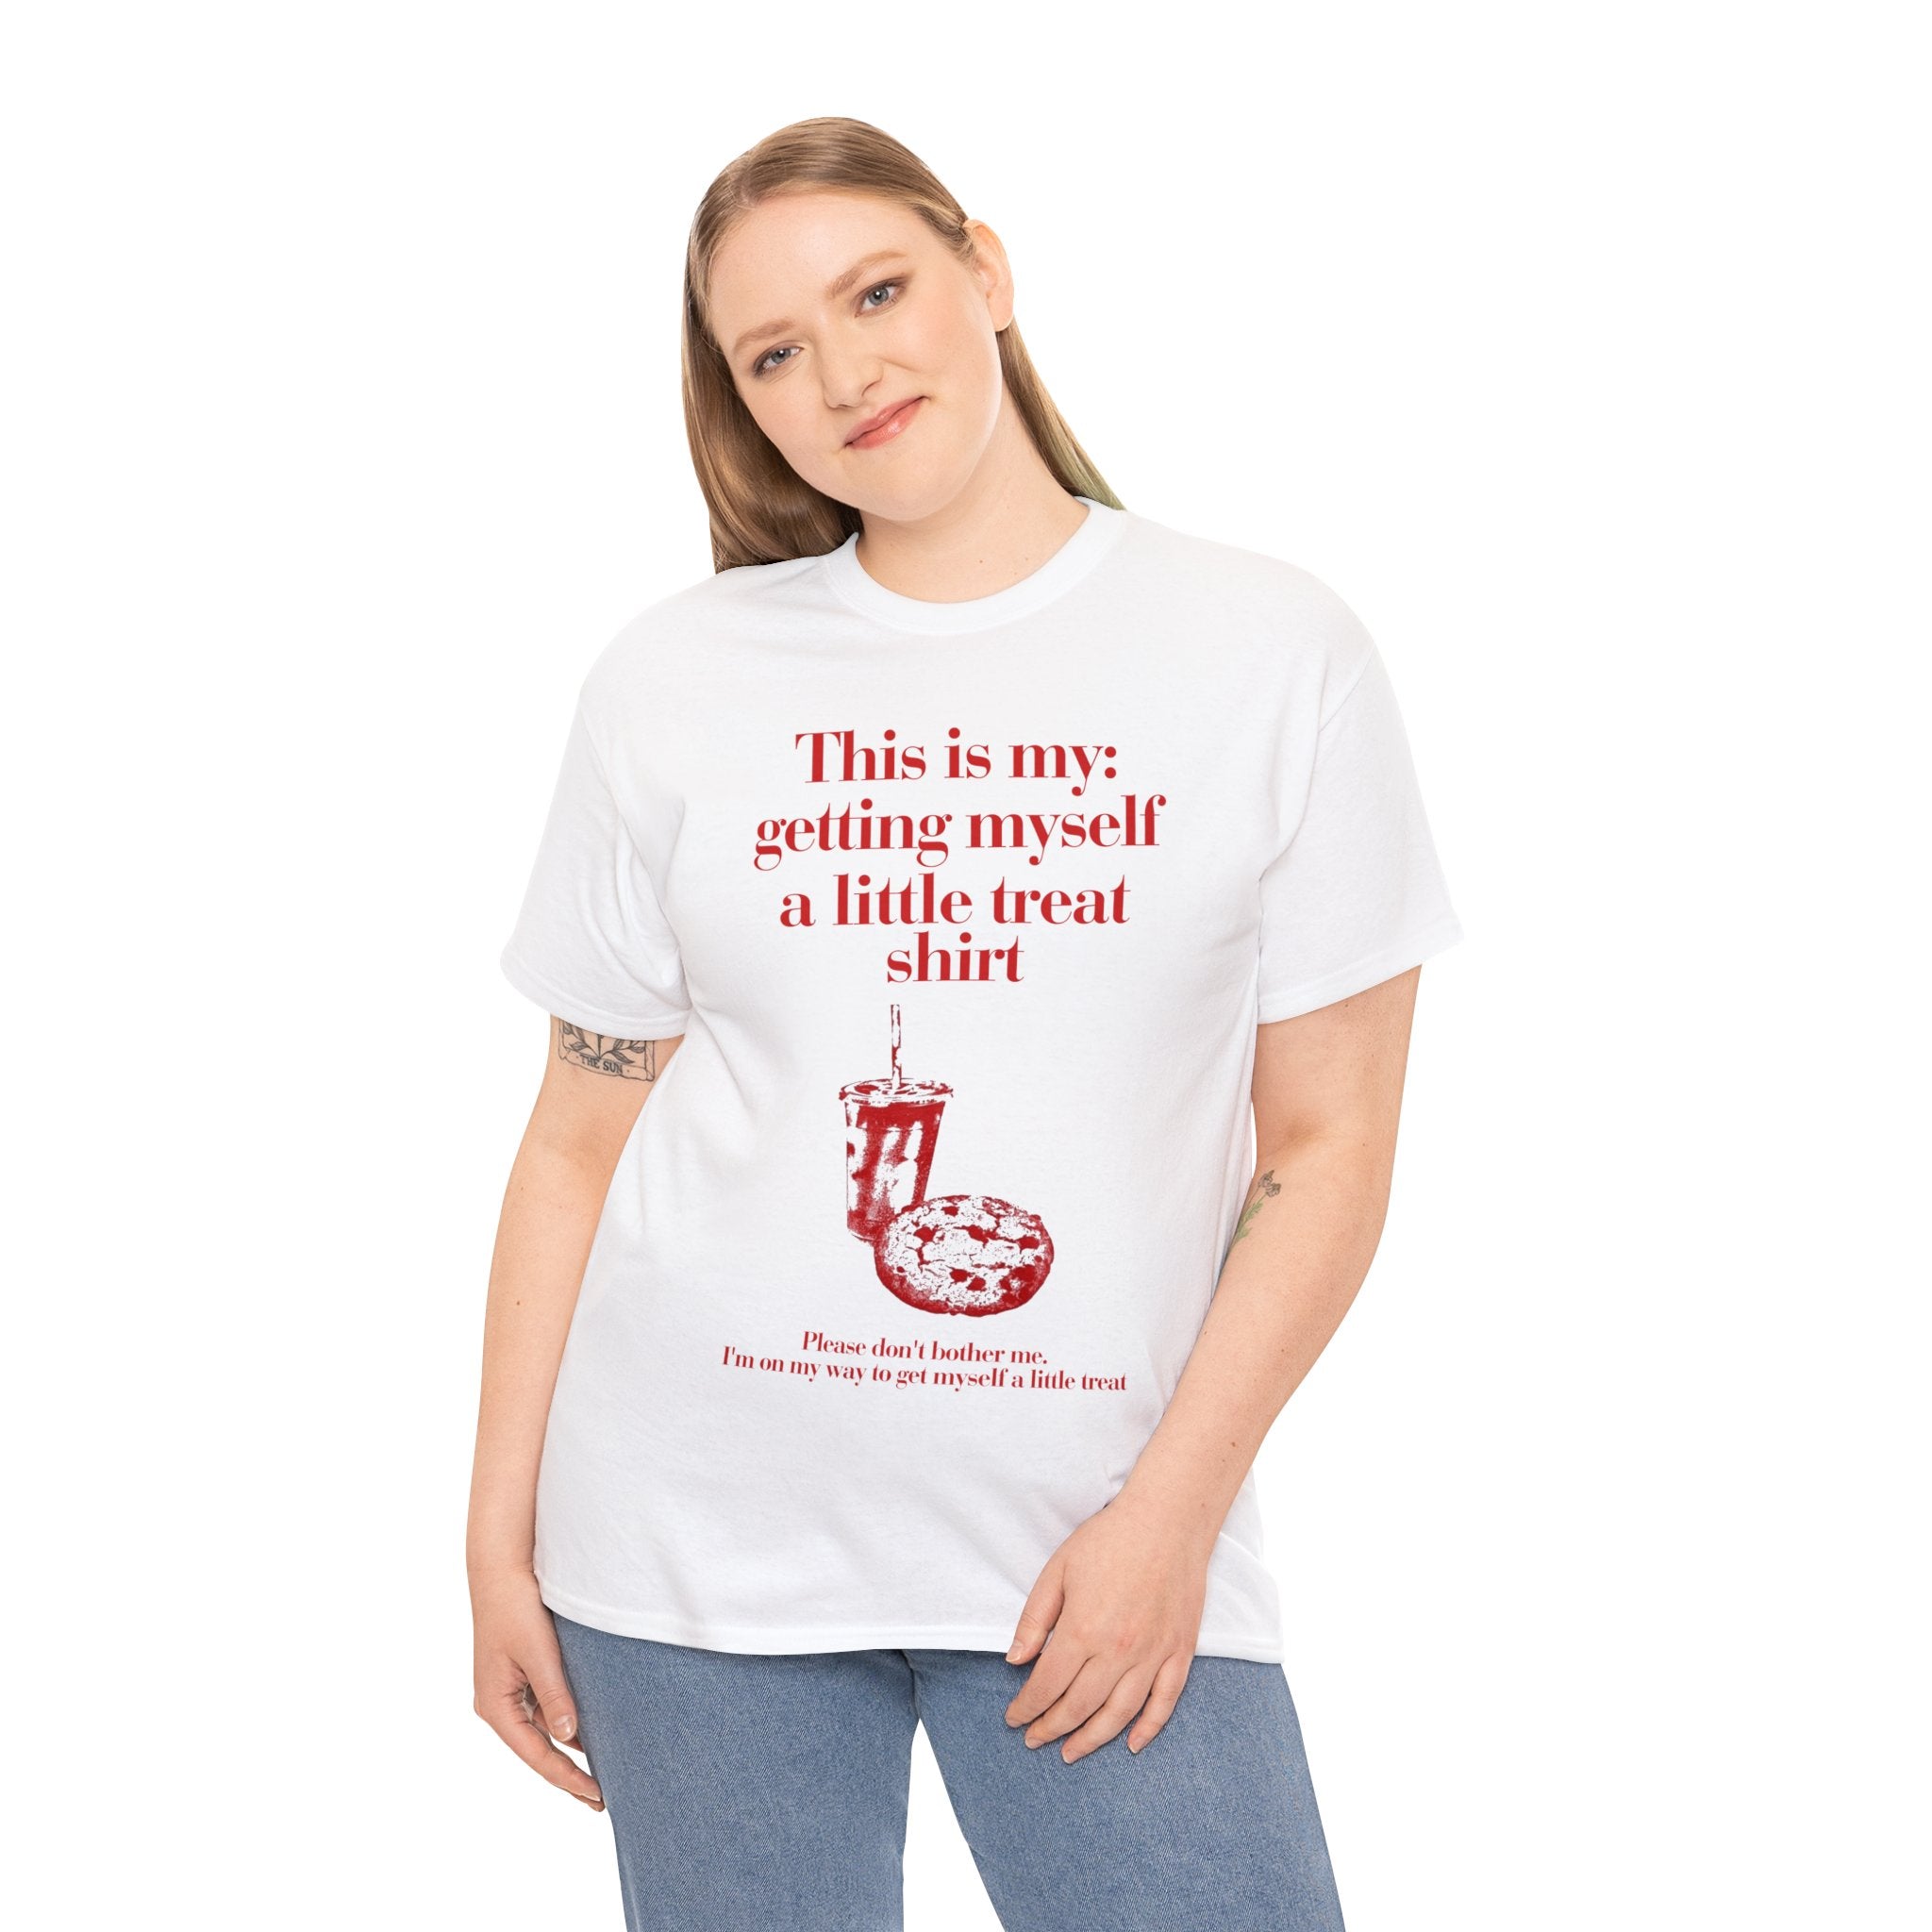 This is my getting myself a little treat shirt - Unisex Heavy Cotton Tee